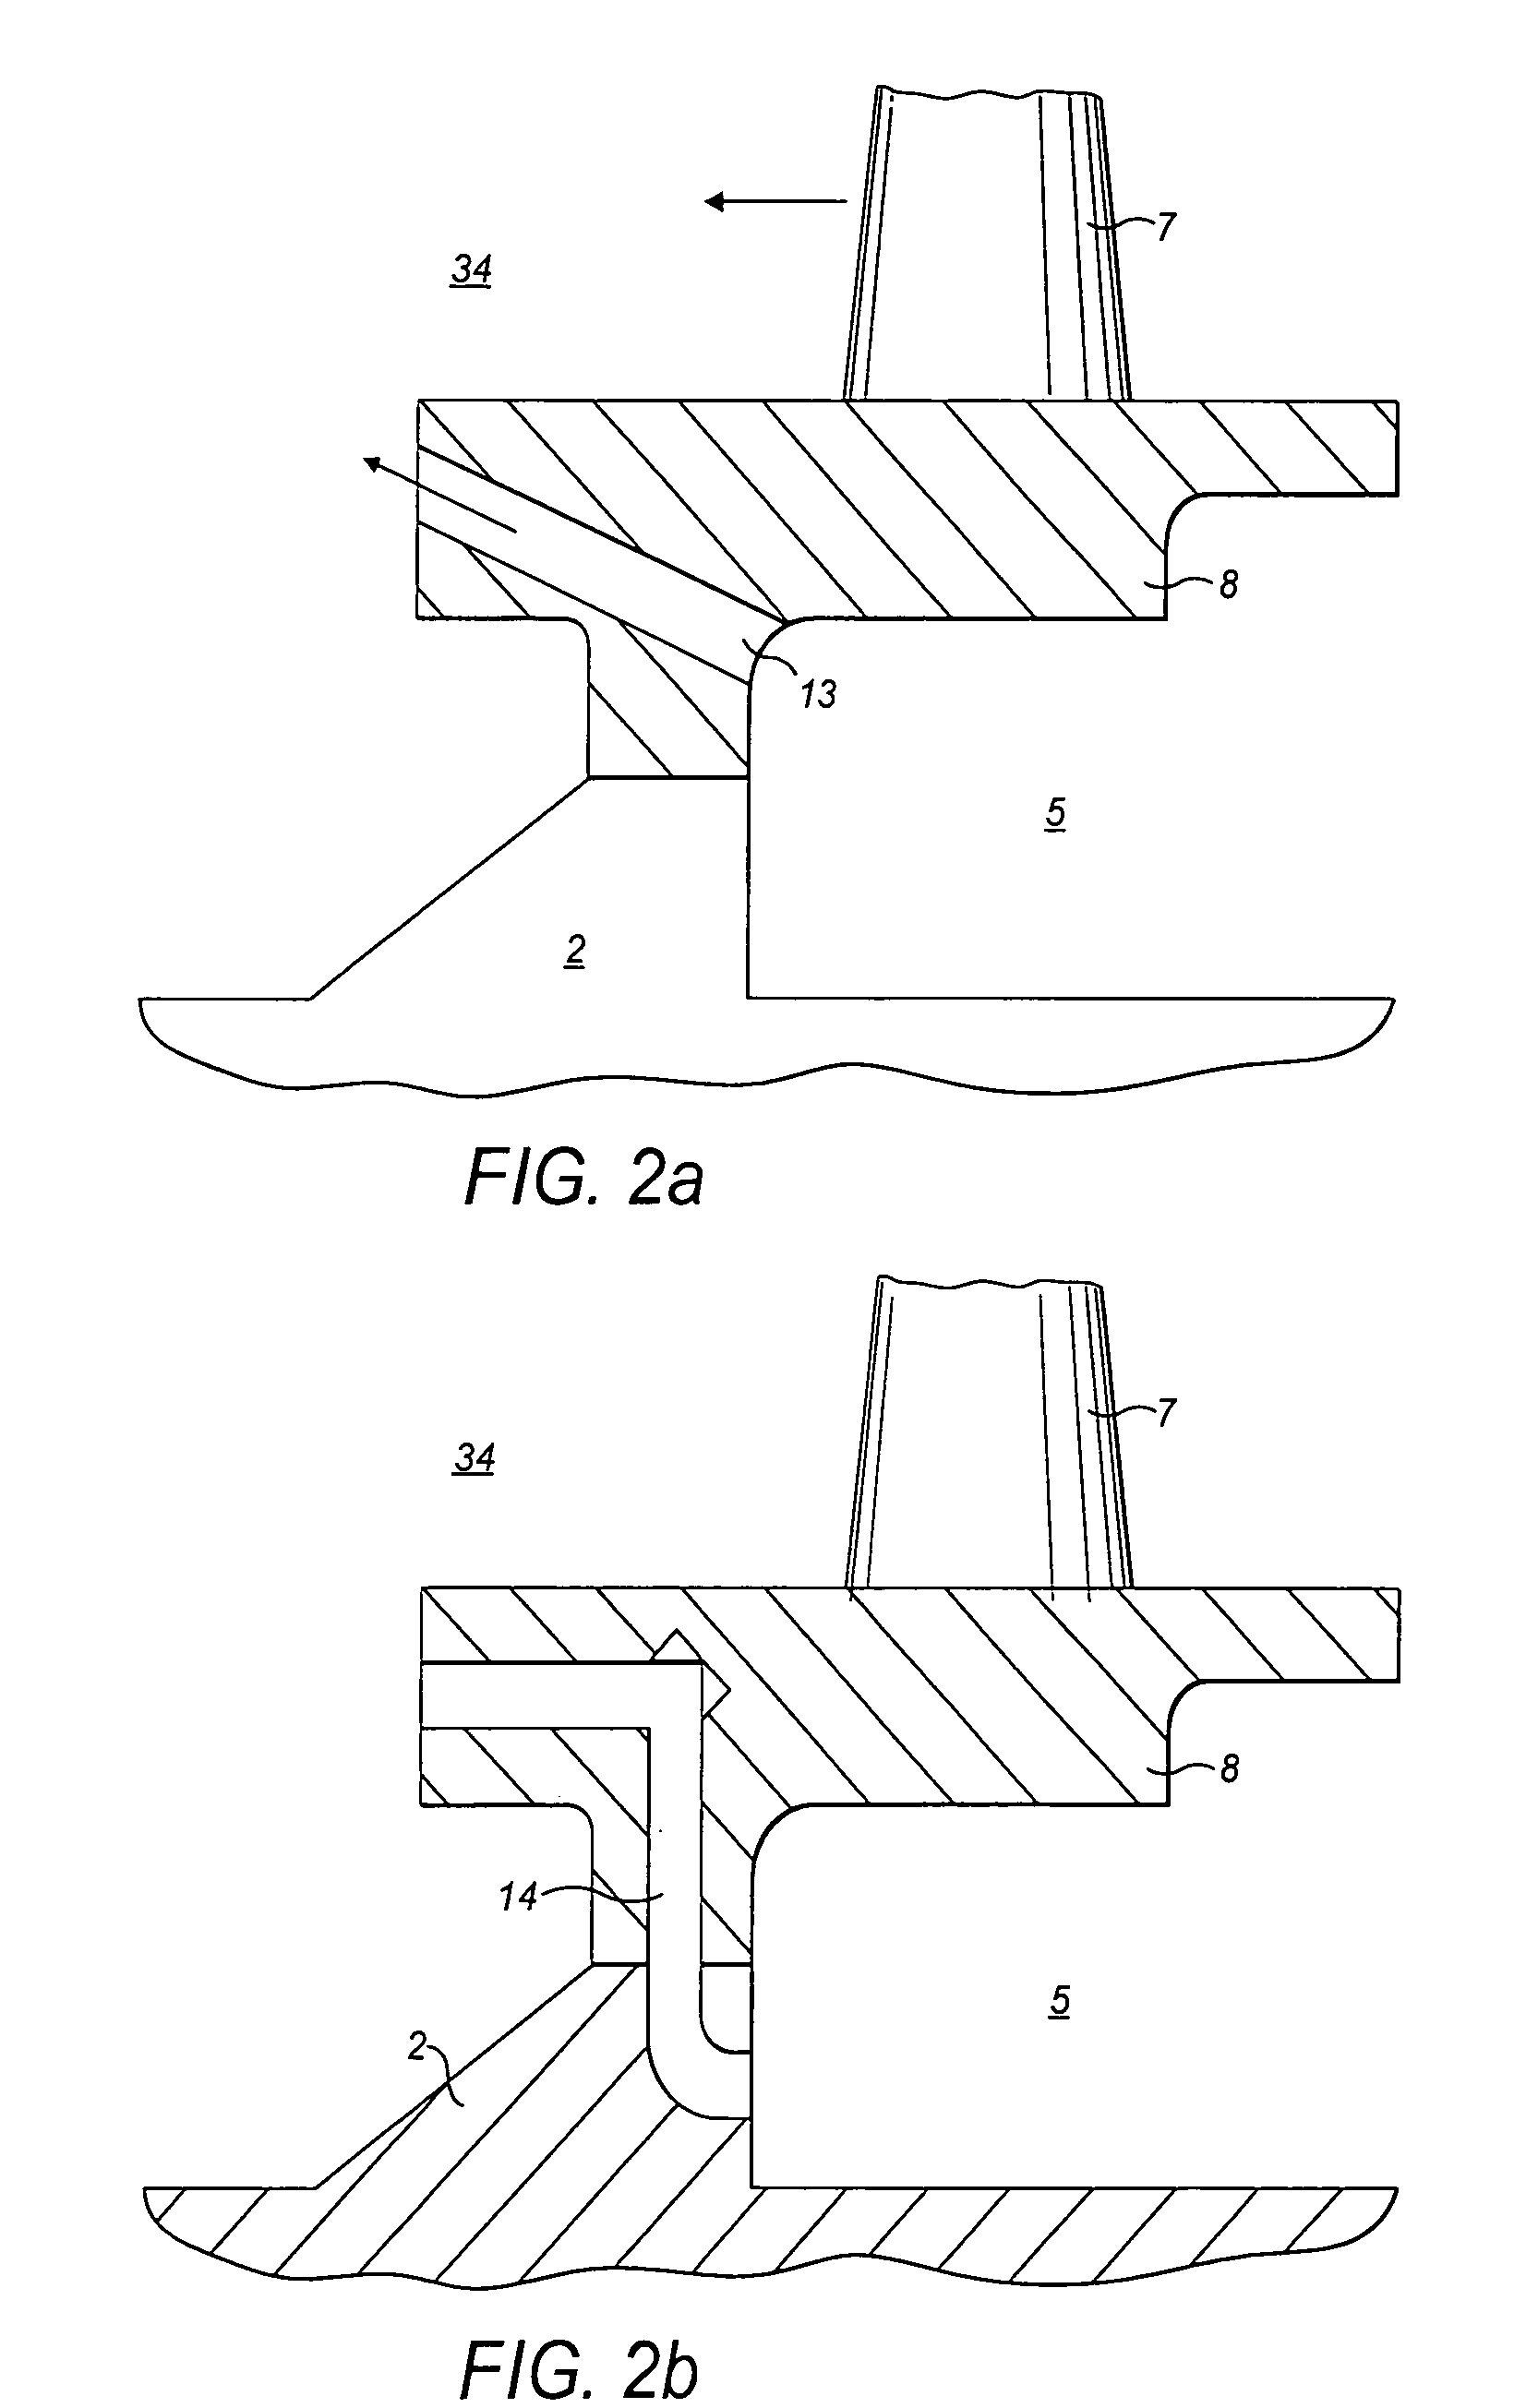 Gas-cooled electrical machine with pressure charging